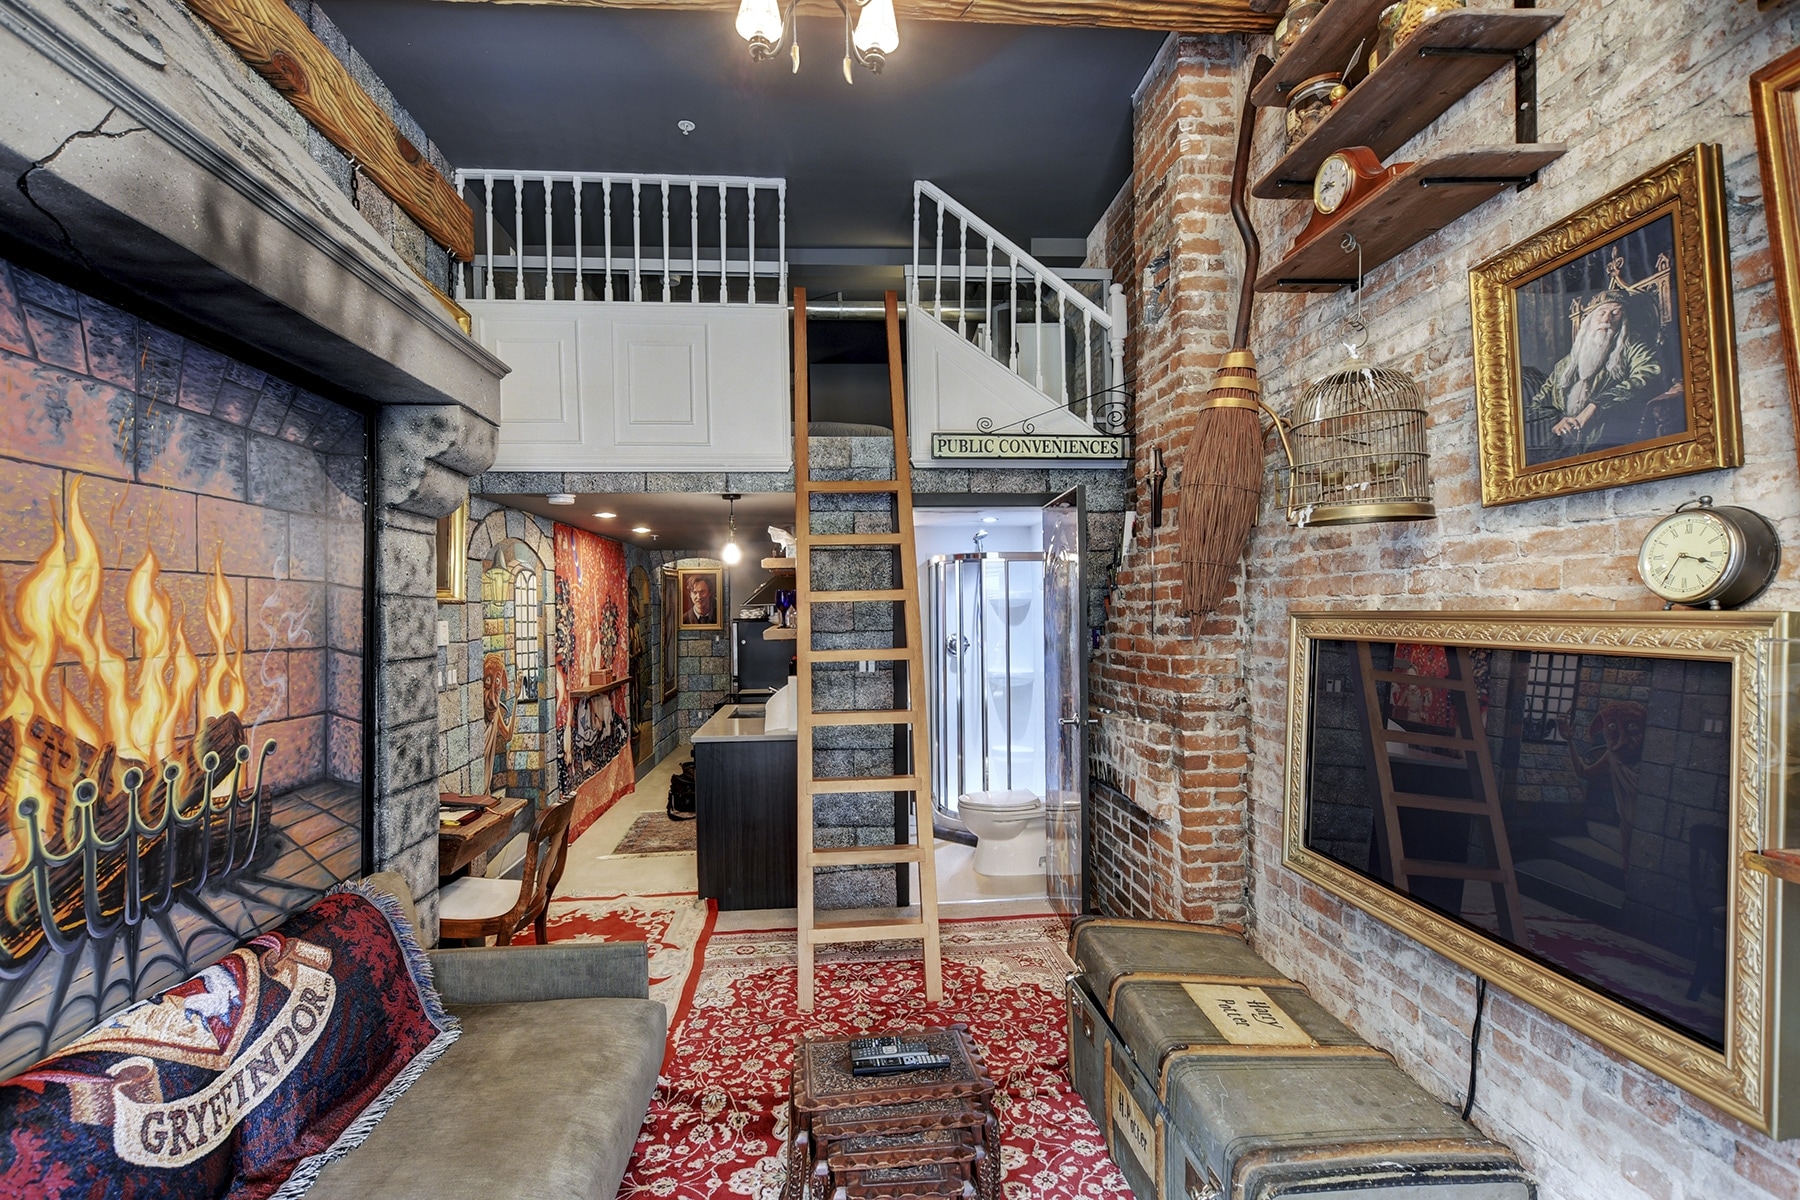 Harry Potter Airbnb For Potterheads To Explore!